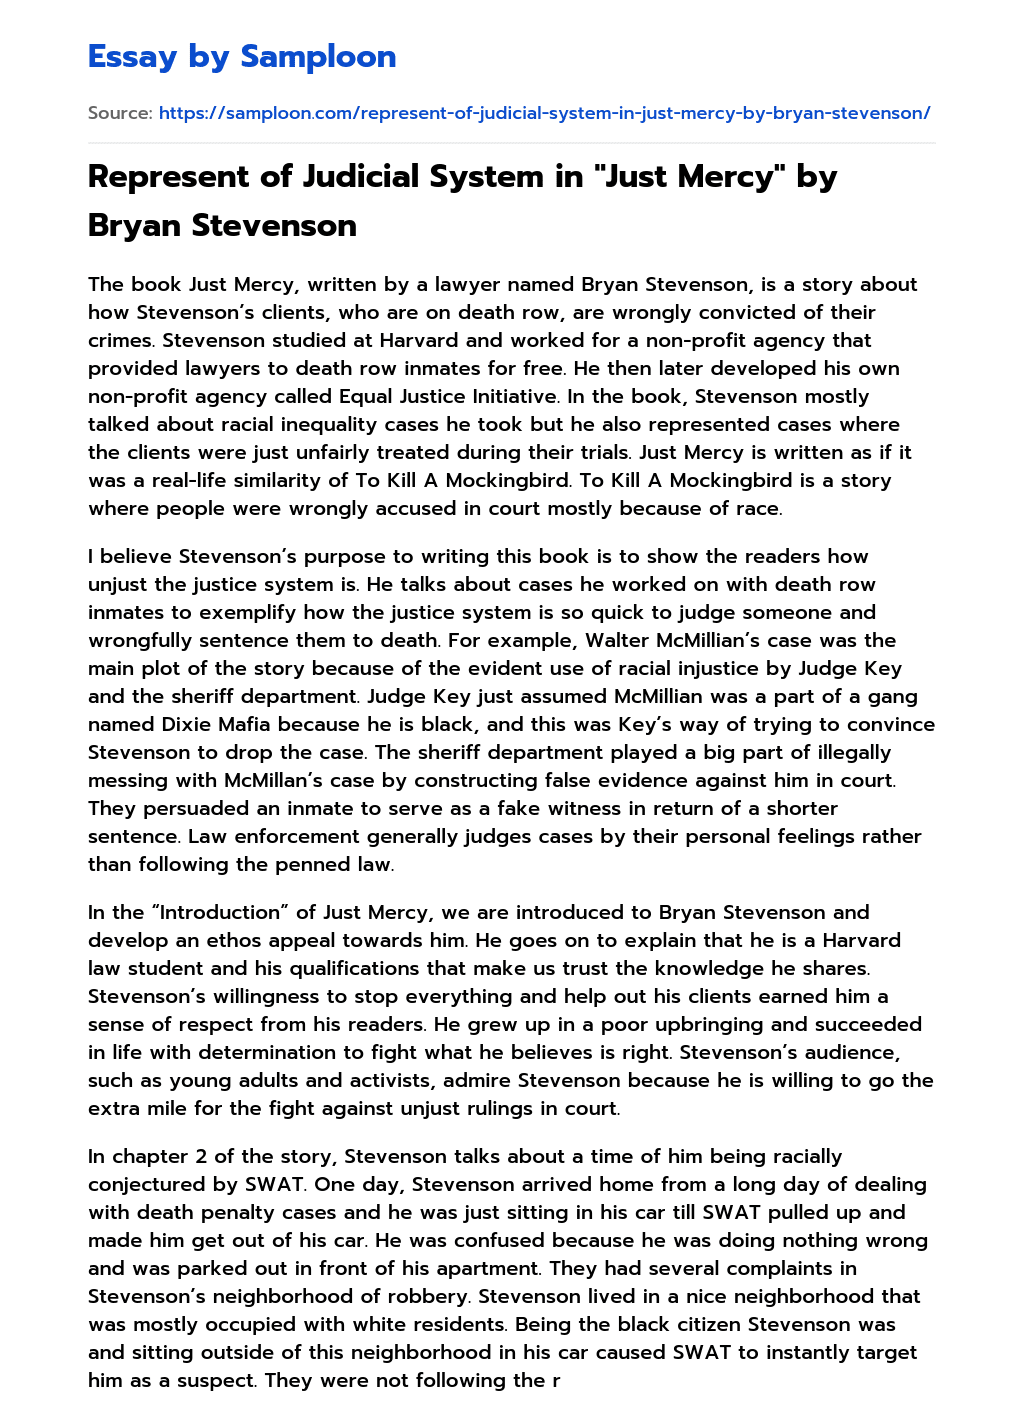 Represent of Judicial System in “Just Mercy” by Bryan Stevenson Analytical Essay essay